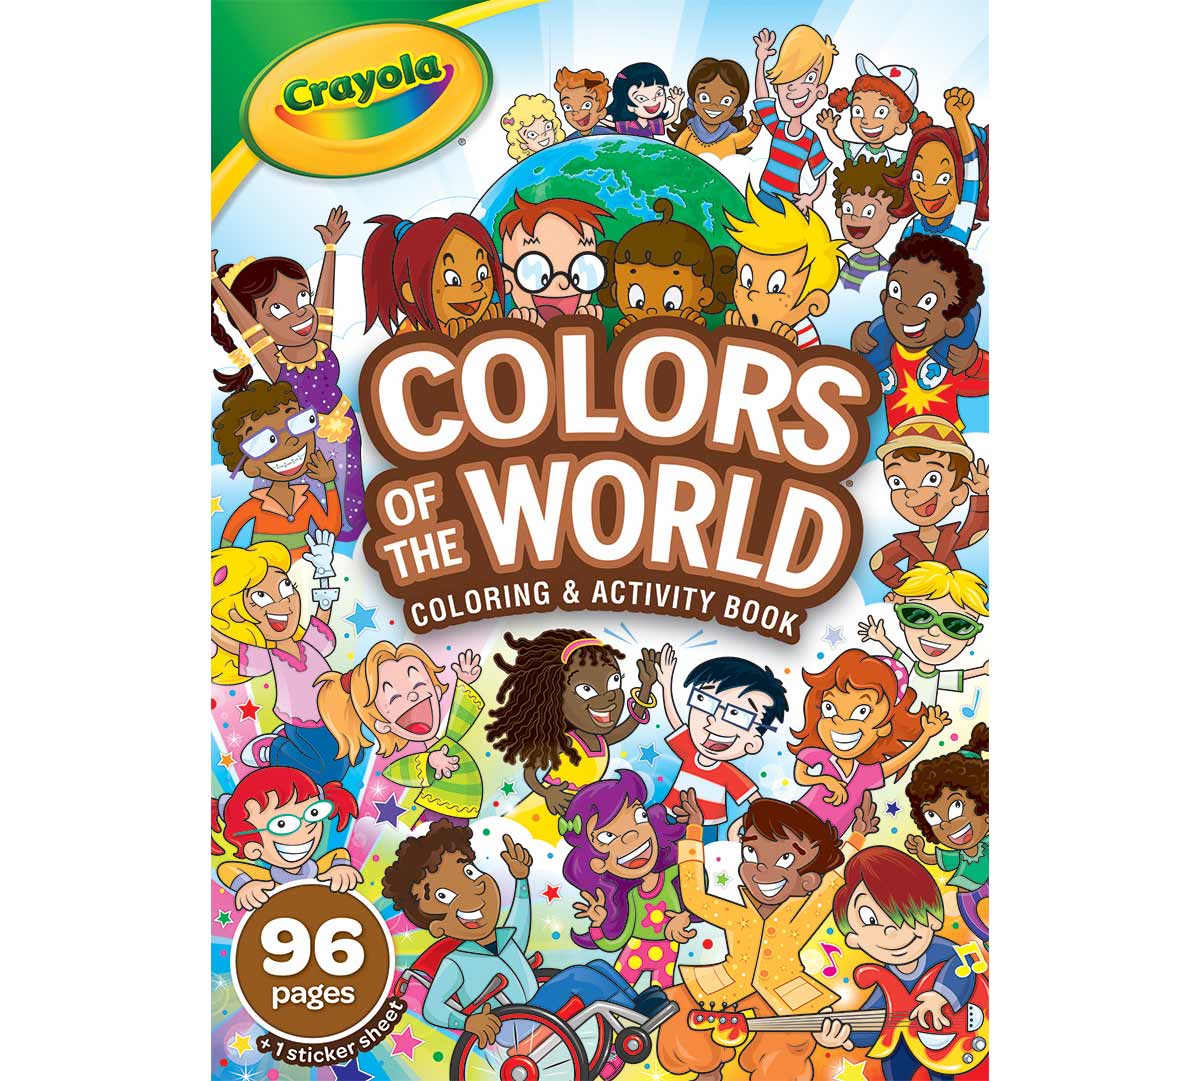 Colors of the World Coloring Book, 20 Pages   Crayola.com   Crayola